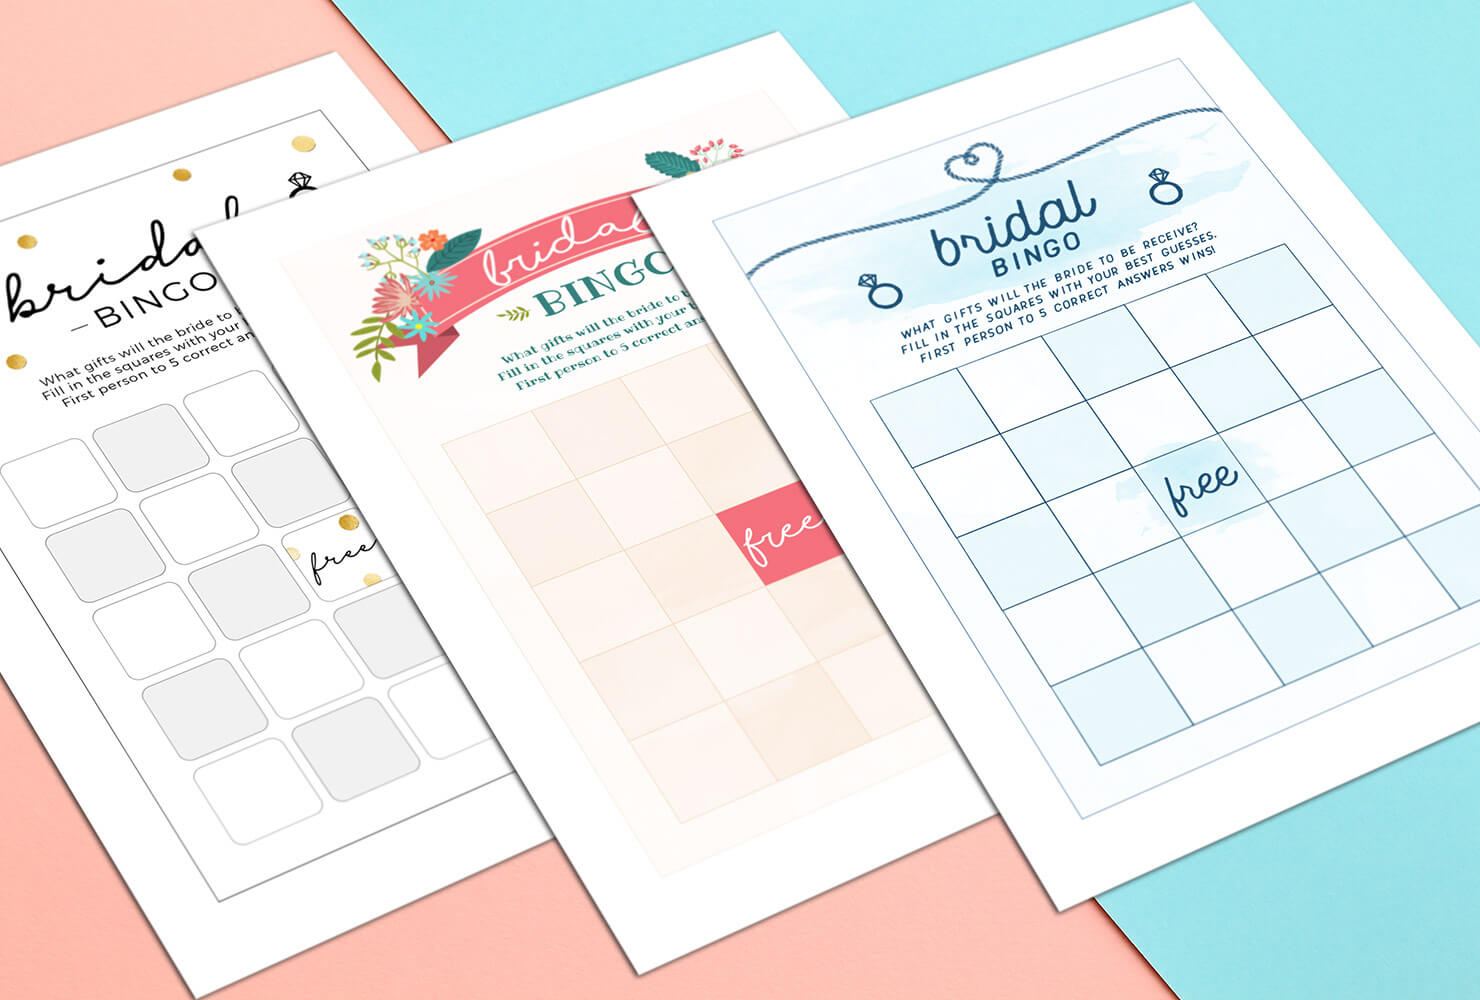 How To Play Bridal Shower Bingo (With Printables) | Shutterfly With Regard To Blank Bridal Shower Bingo Template